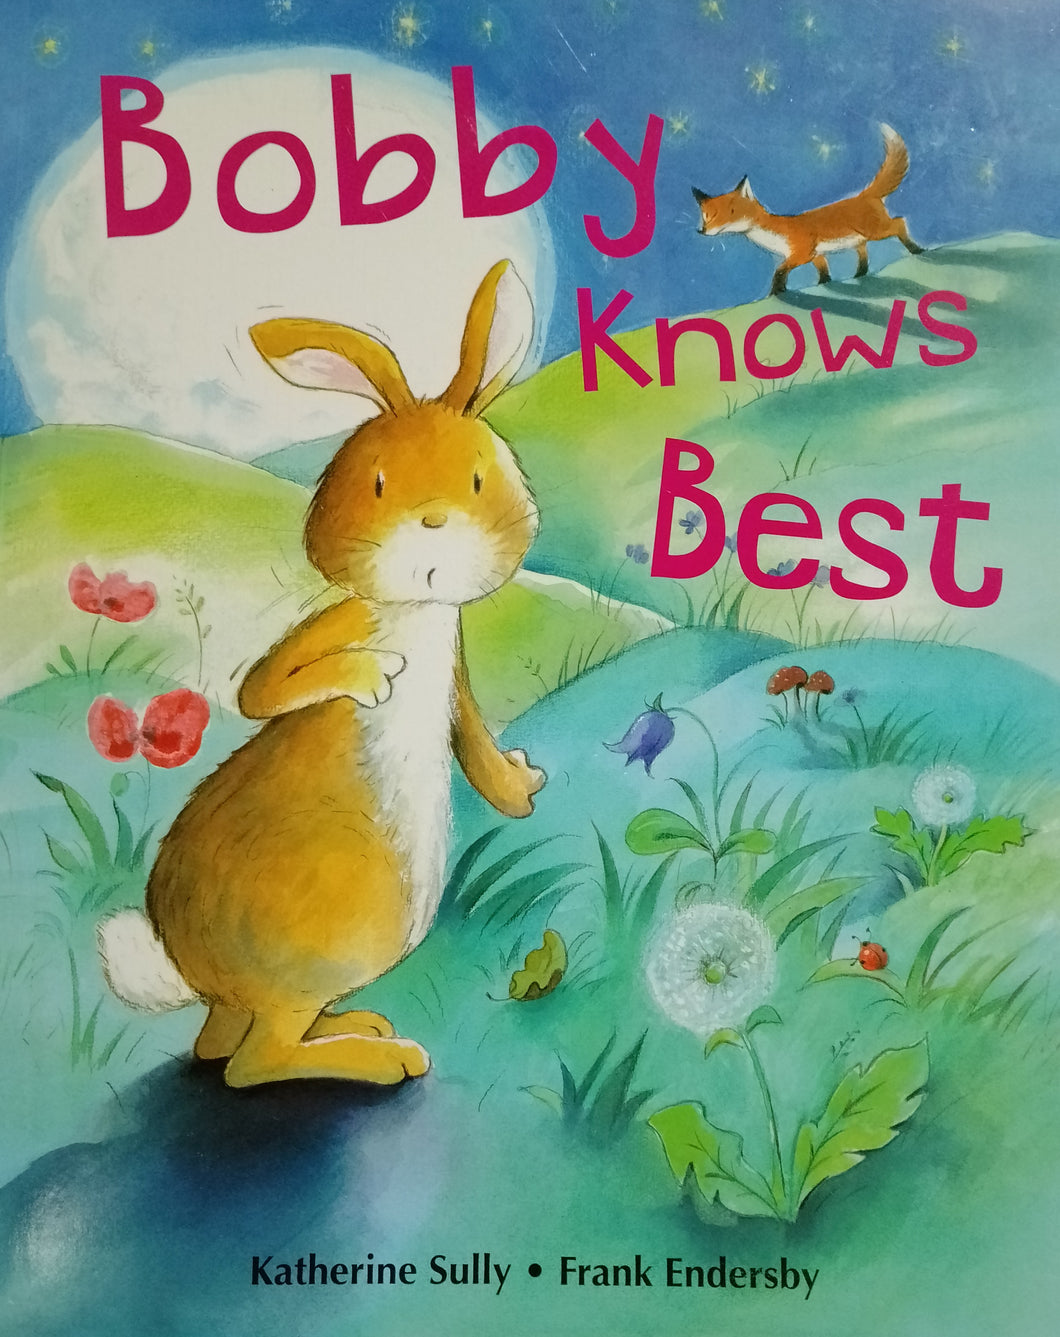 Bobby Knows Best by Katherine Sully